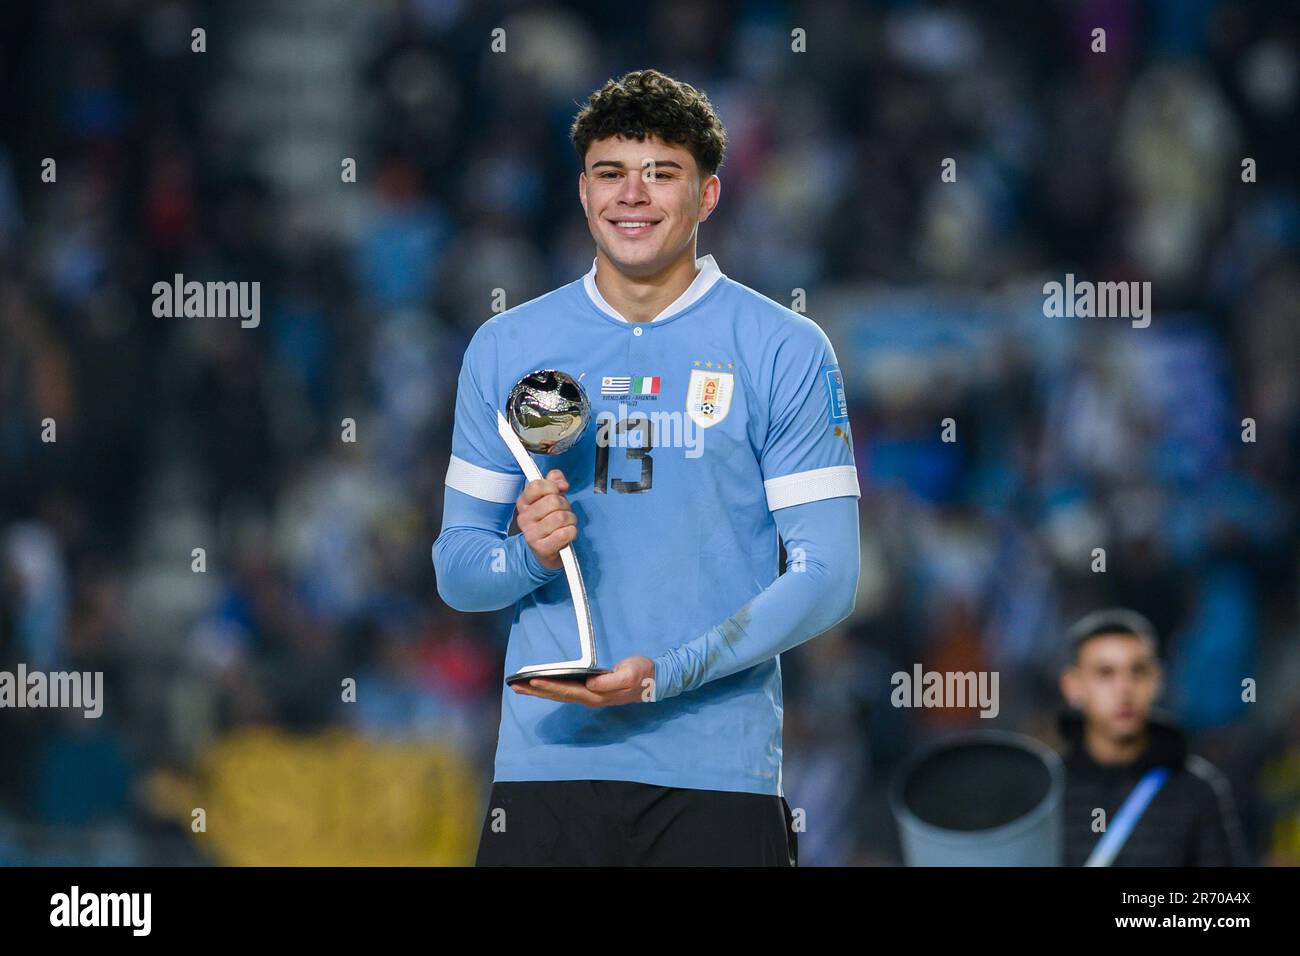 Alan Matturro of Uruguay poses for a photo with the Adidas Silver Ball Trophy during the FIFA U-20 World Cup Argentina 2023 Final match between Italy and Uruguay at Estadio La Plata. Stock Photo